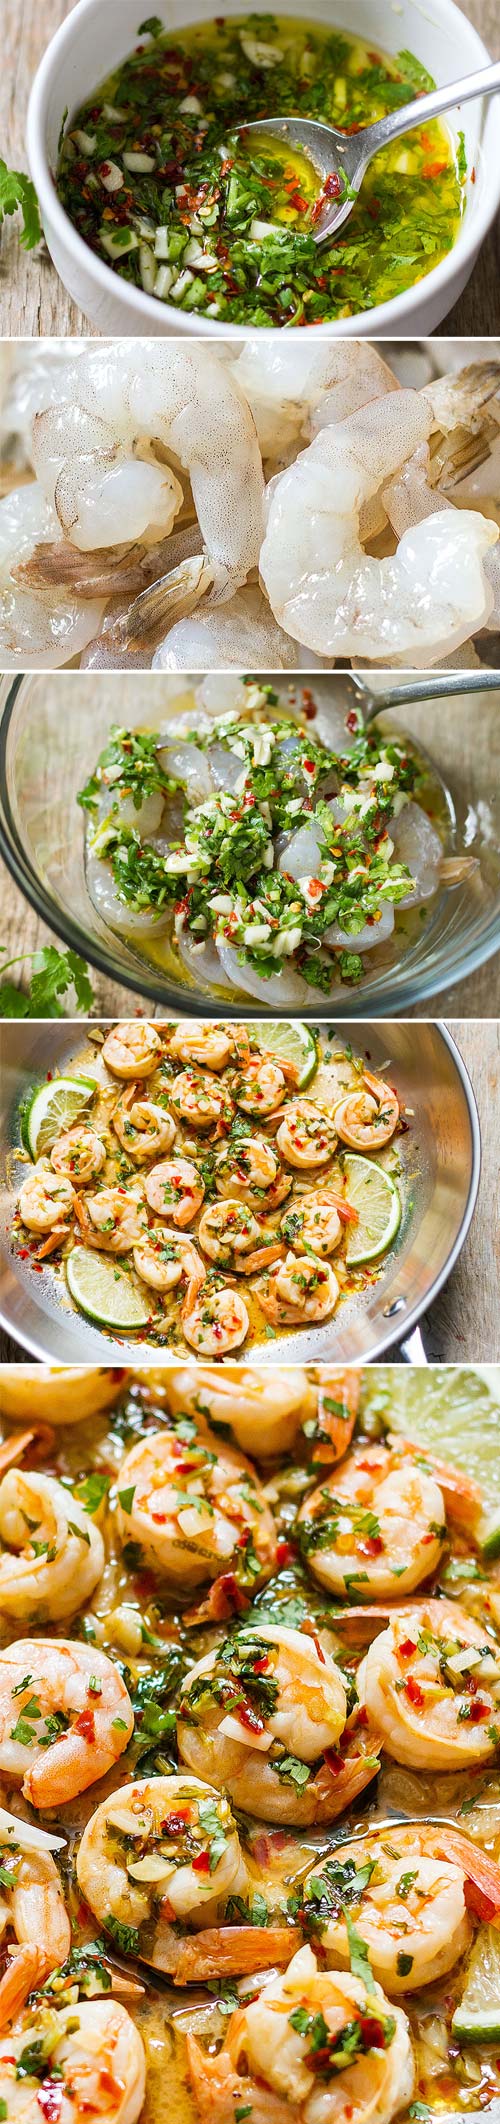 Cilantro Lime Shrimp - #shrimp #recipe #eatwell101 - This cilantro lime shrimp recipe is a perfect low-calorie option when you're looking for a quick, light dinner.